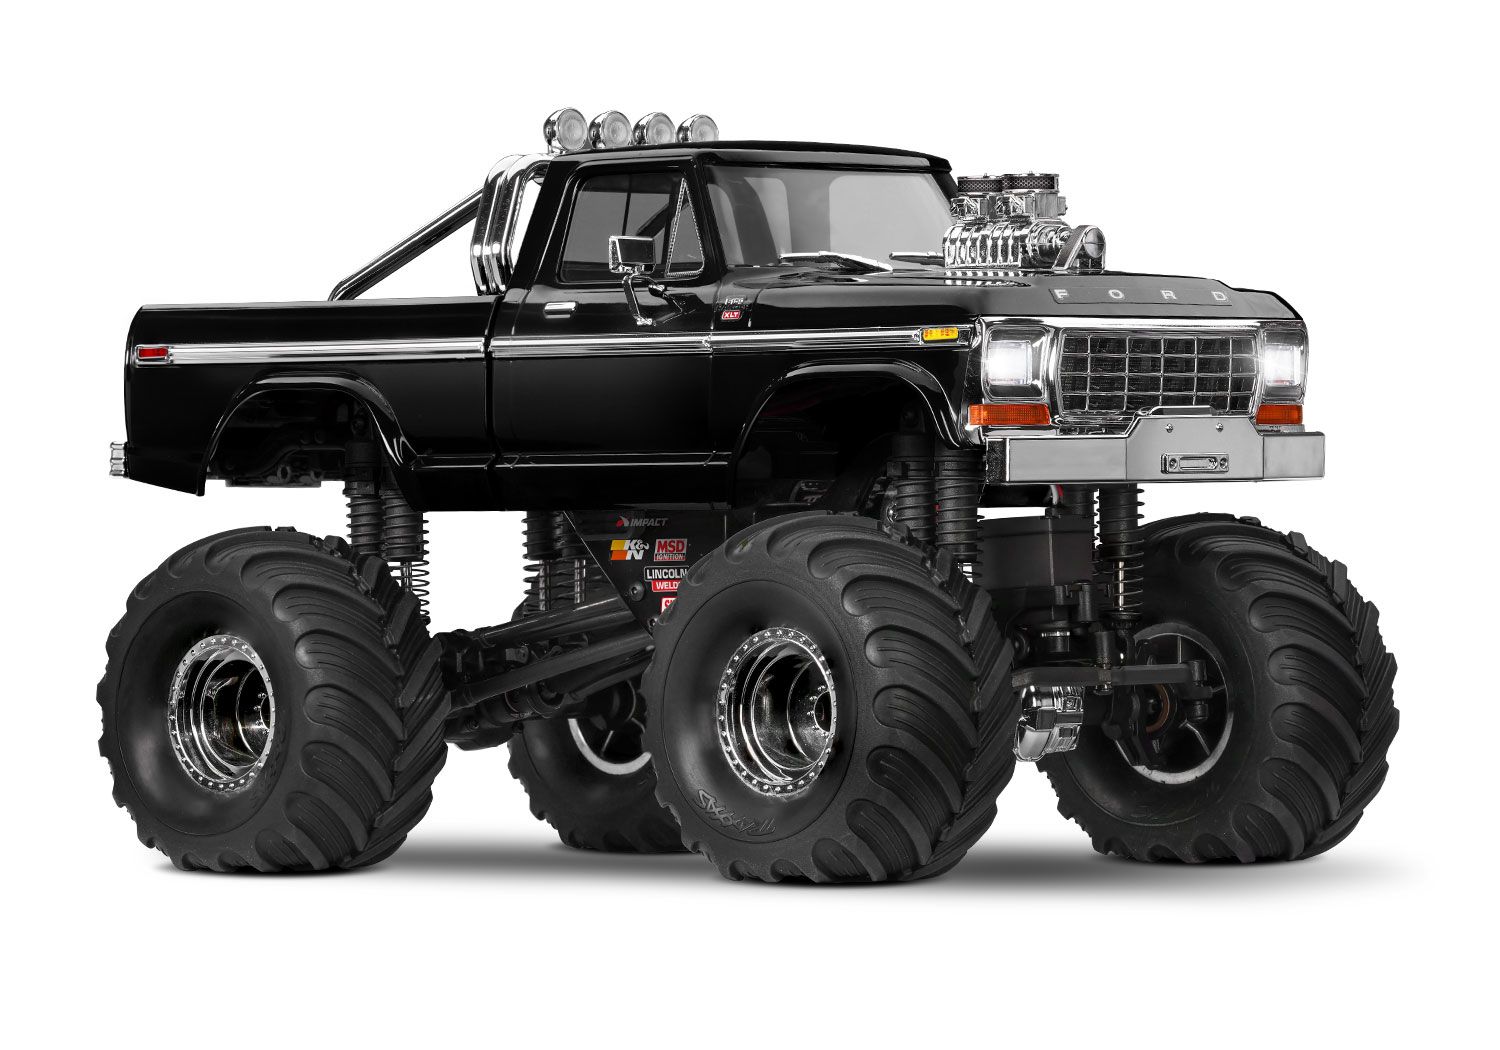 TRAXXAS 98044-1 TRX-4MT with Ford® F-150® pickup body: 1/18 scale 4X4 monster truck RTR with TQ™ 2.4 GHz 2-channel transmitter, and ECM-2.5 waterproof electronics.